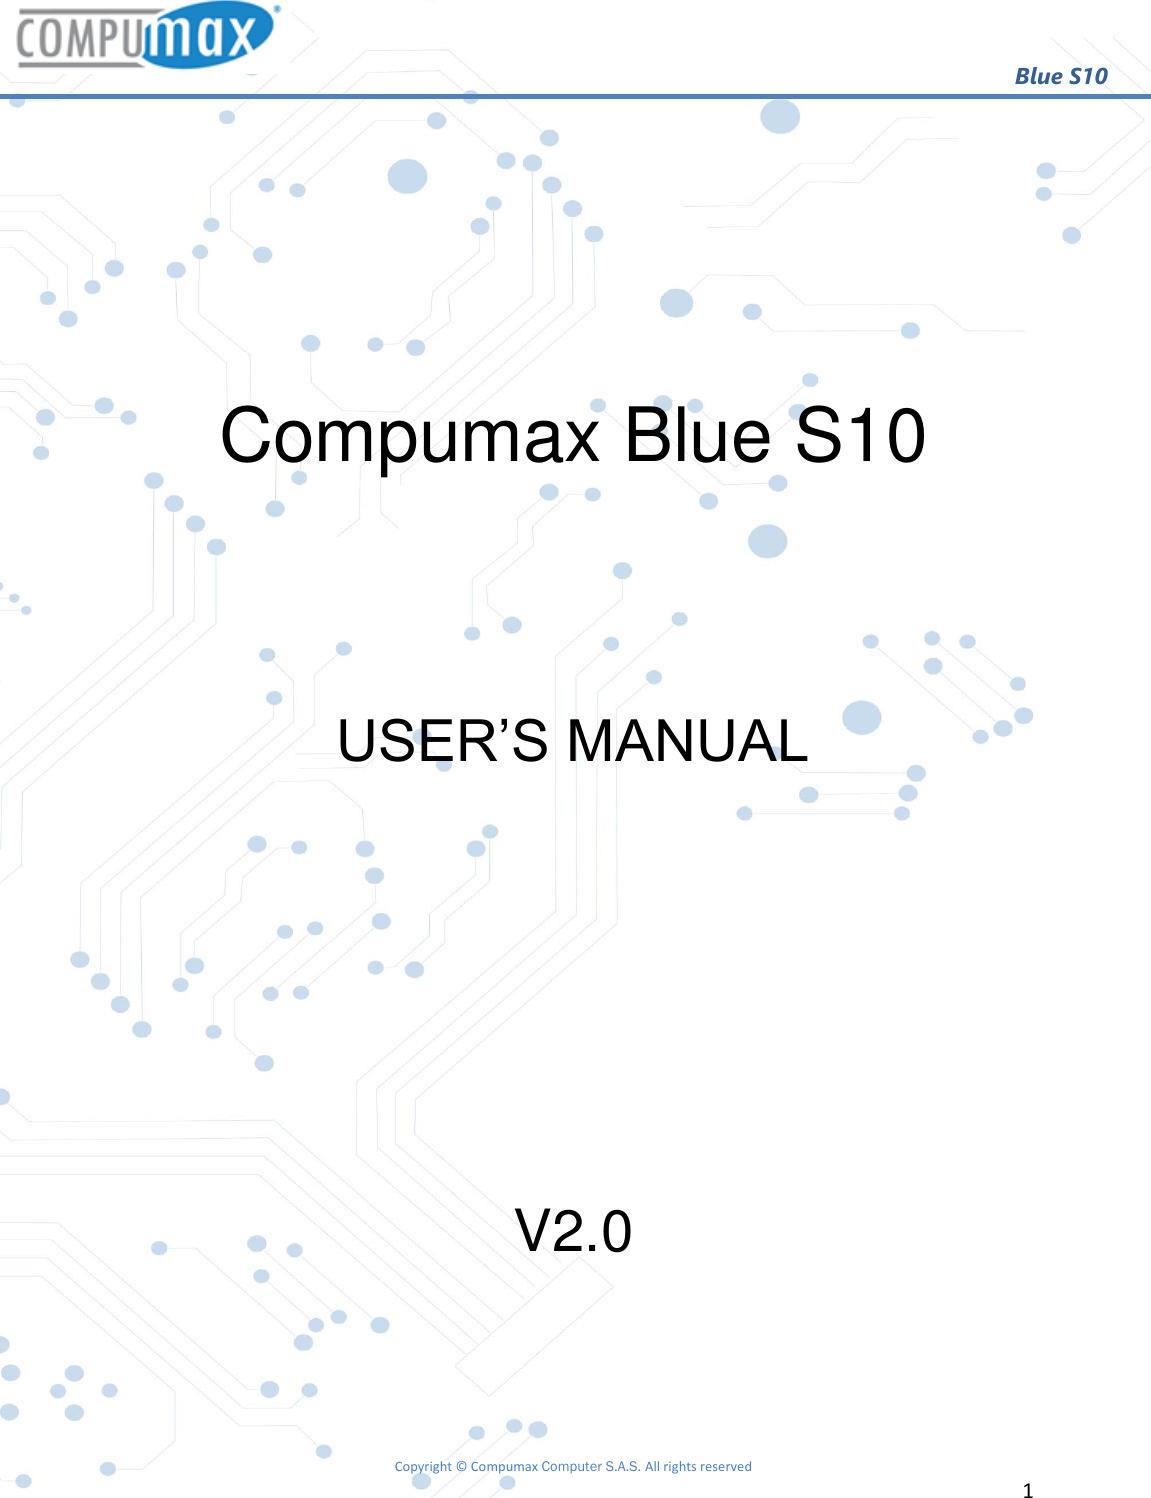                                                        Blue S10 Copyright © Compumax Computer S.A.S. All rights reserved     1        Compumax Blue S10   USER’S MANUAL     V2.0  